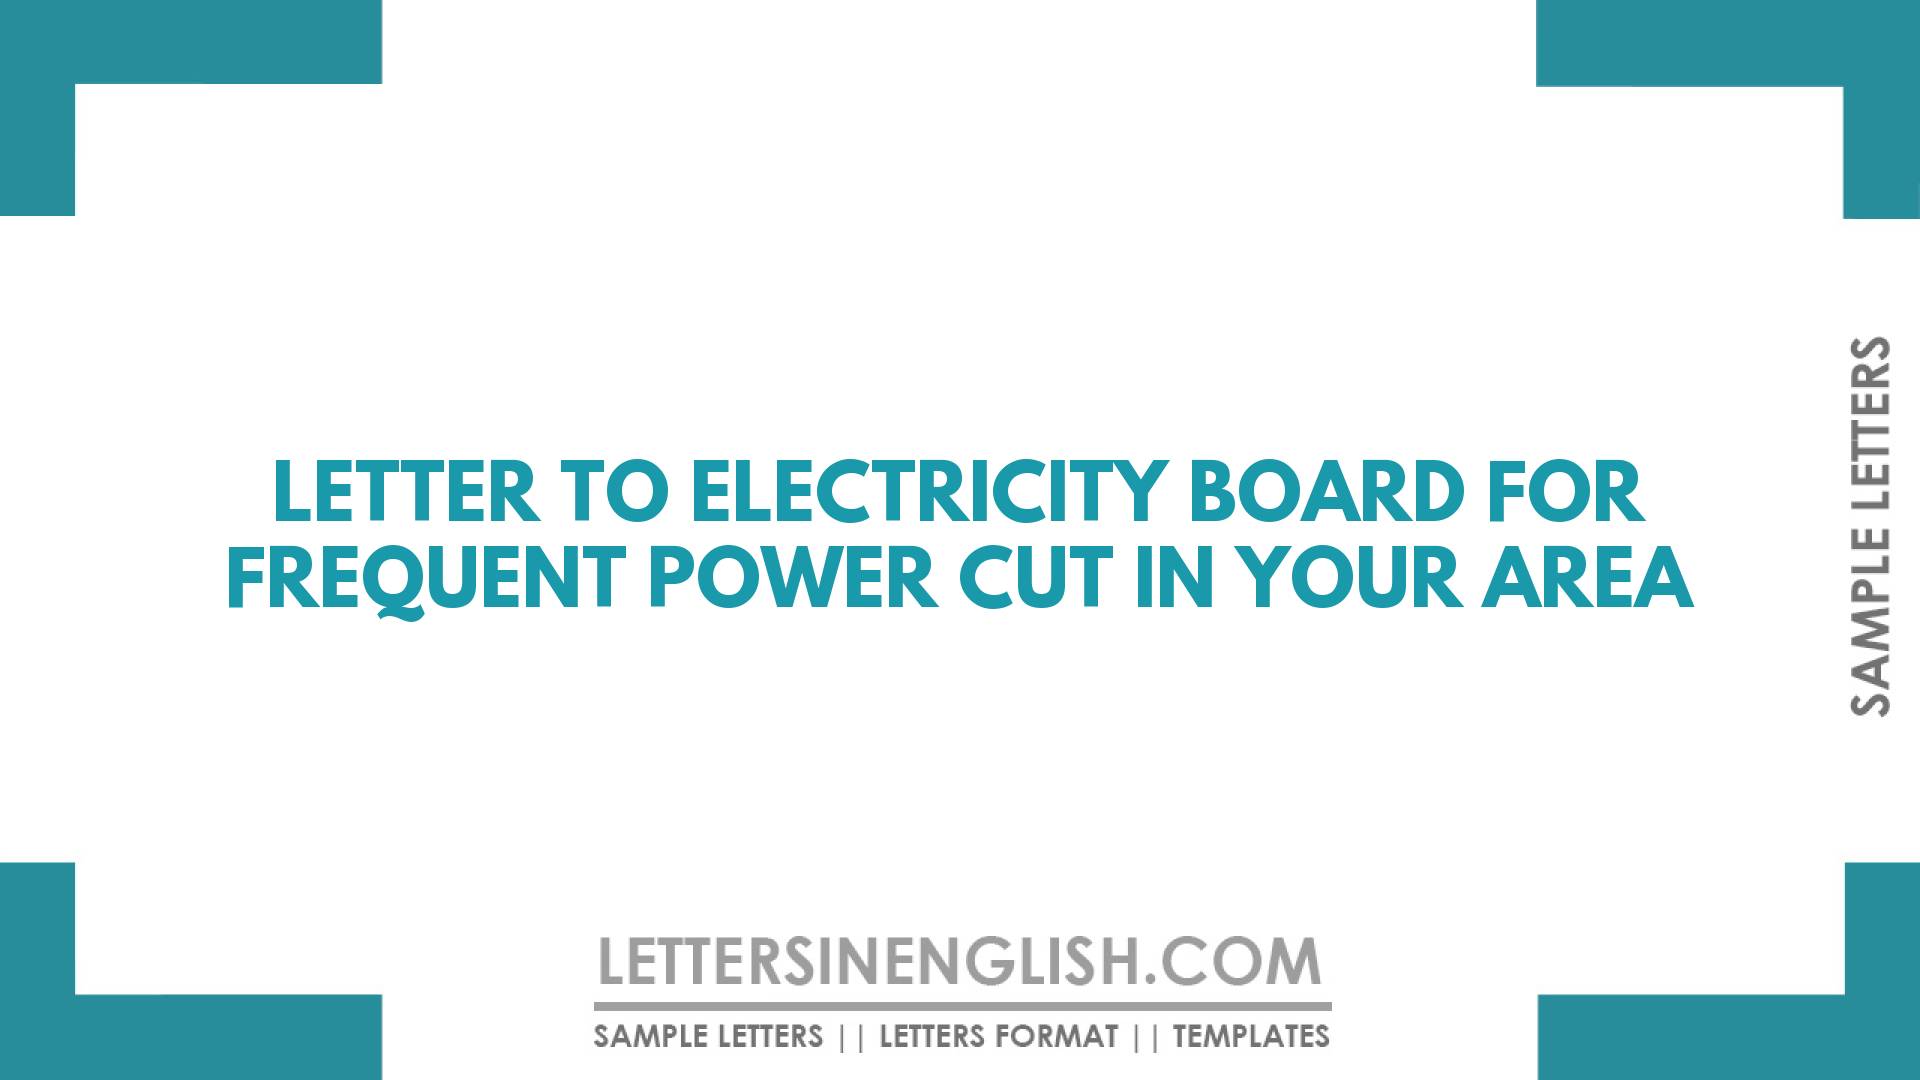 Letter to Electricity Board for Frequent Power Cut in Your Area